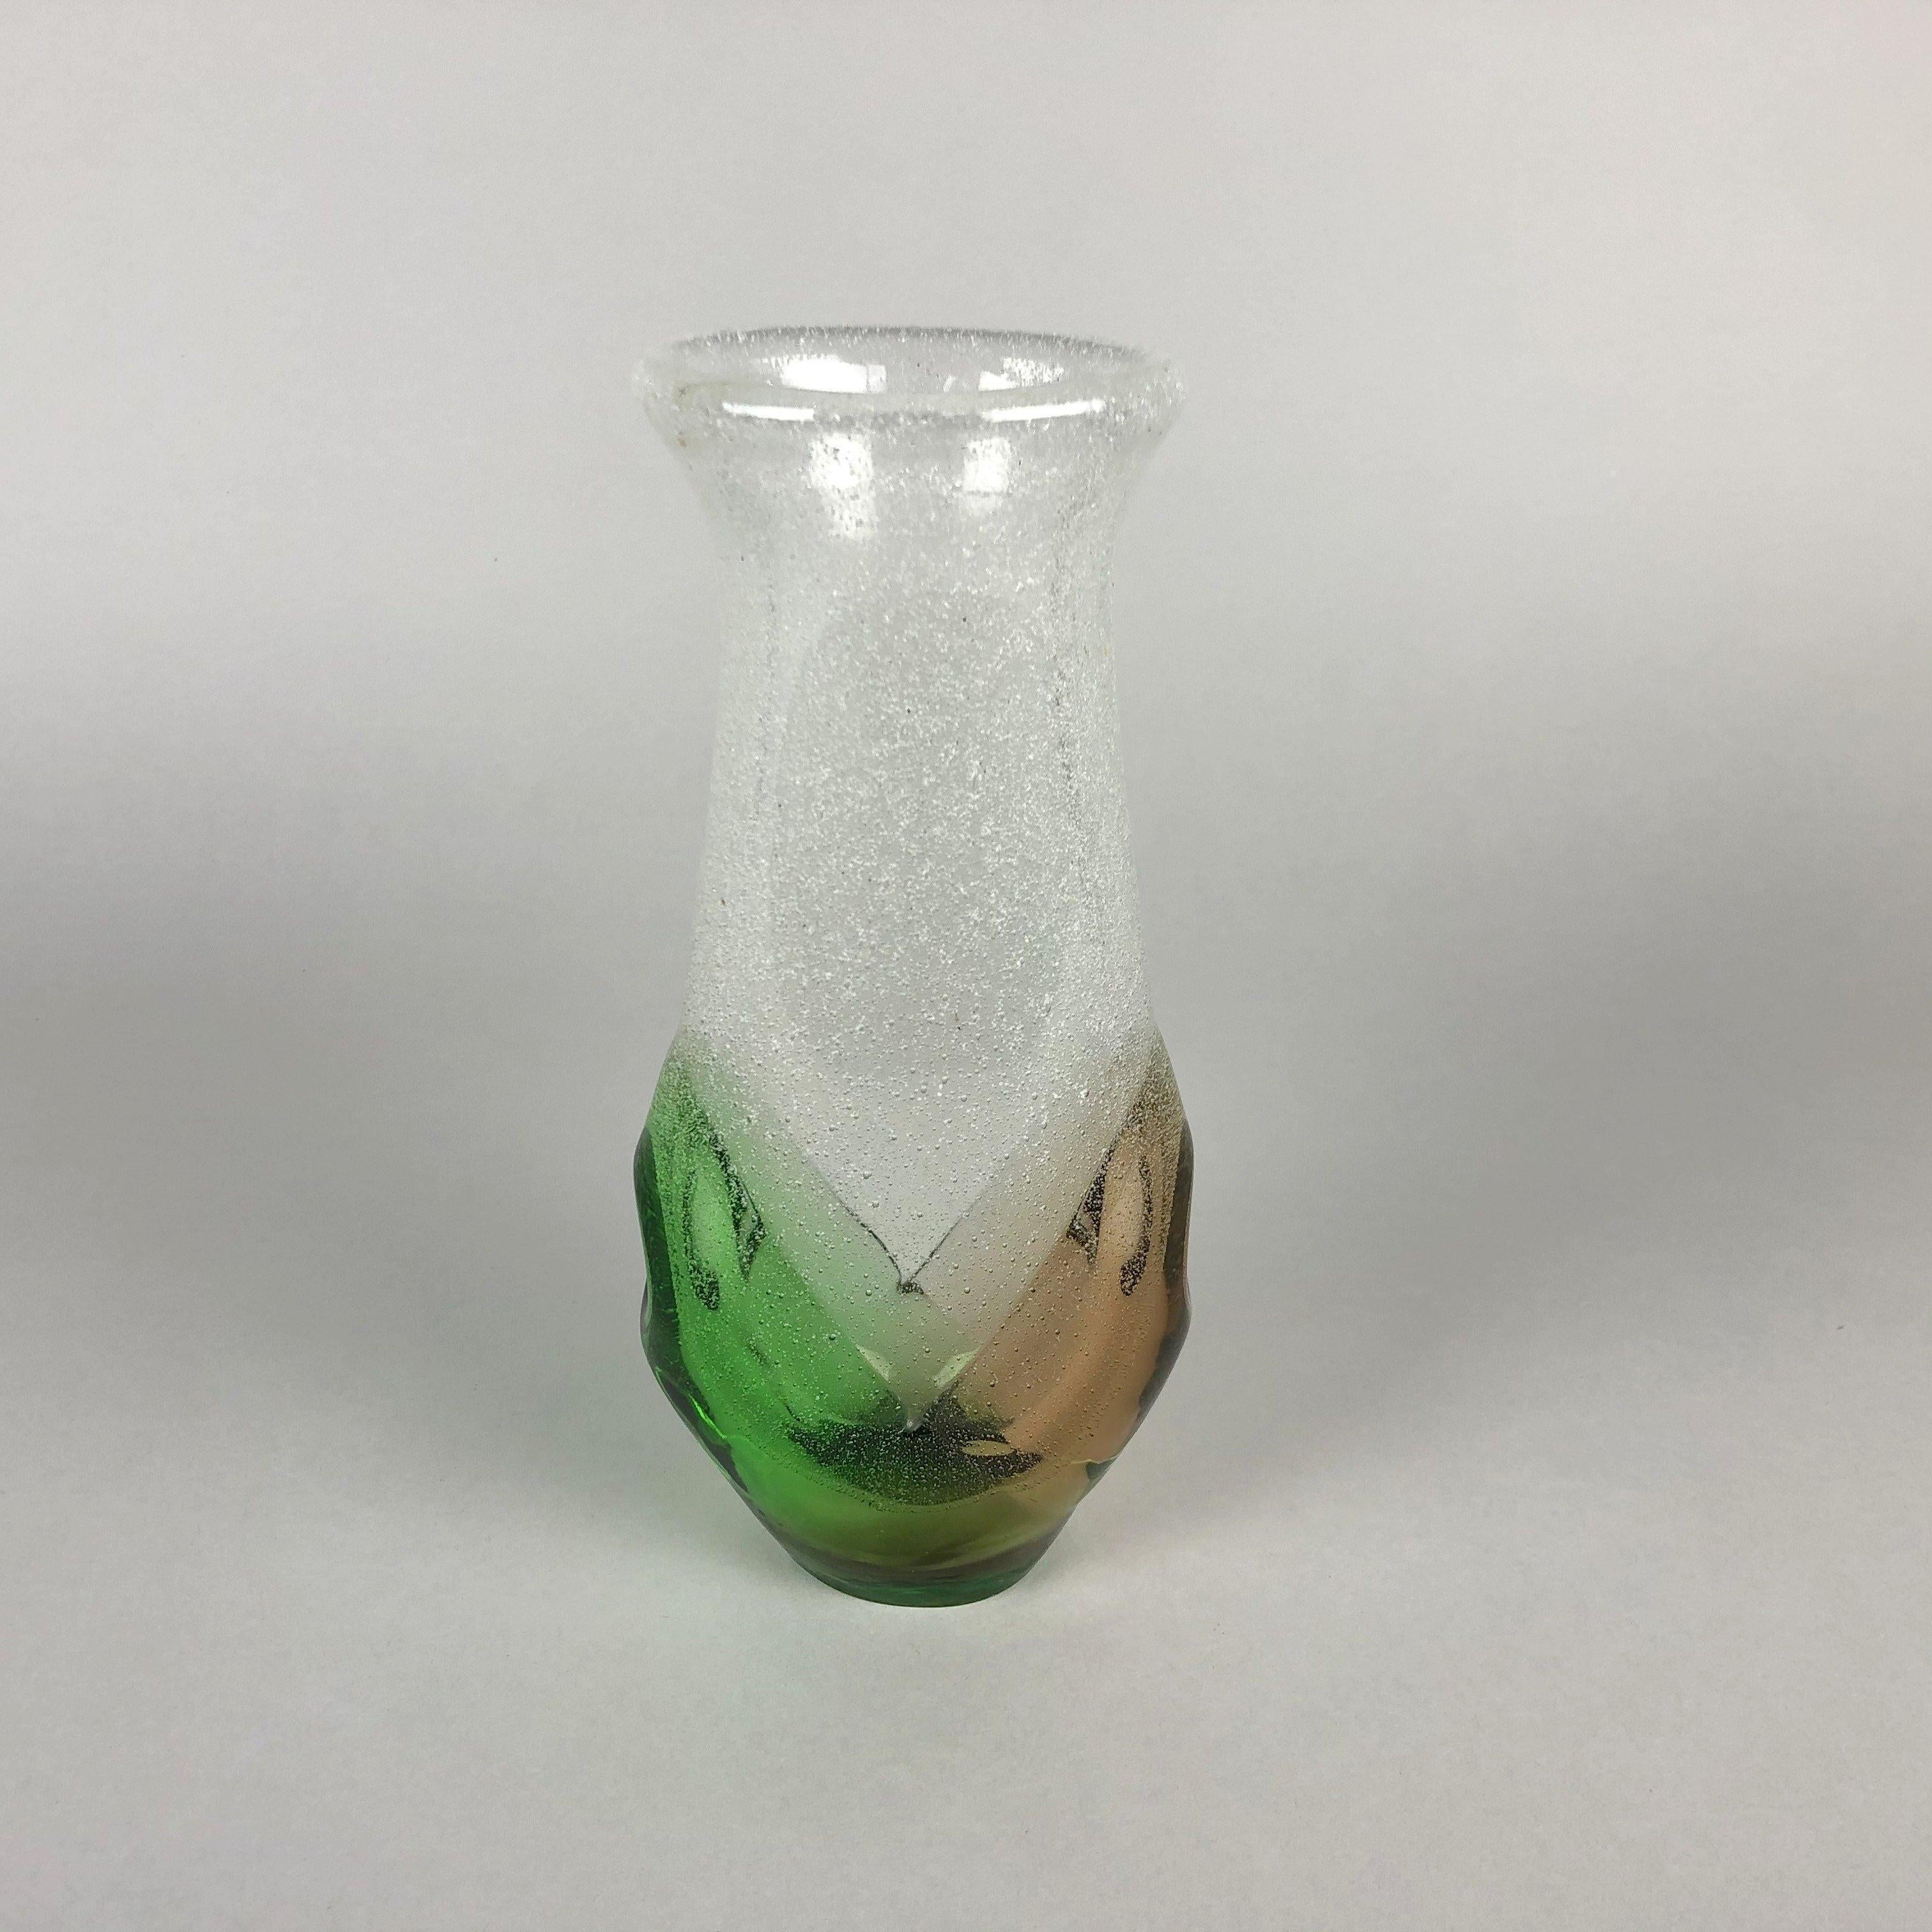 Vintage glass vase, designed by Frantisek Spinar in 1976 and manufactured by Skrdlovice glassworks in Czechoslovakia. 
The vase is approximately 23 cm high (9.06 inch), 10.5 cm (4.13 inch) wide across the widest point and about 6 cm (2.36 inch)